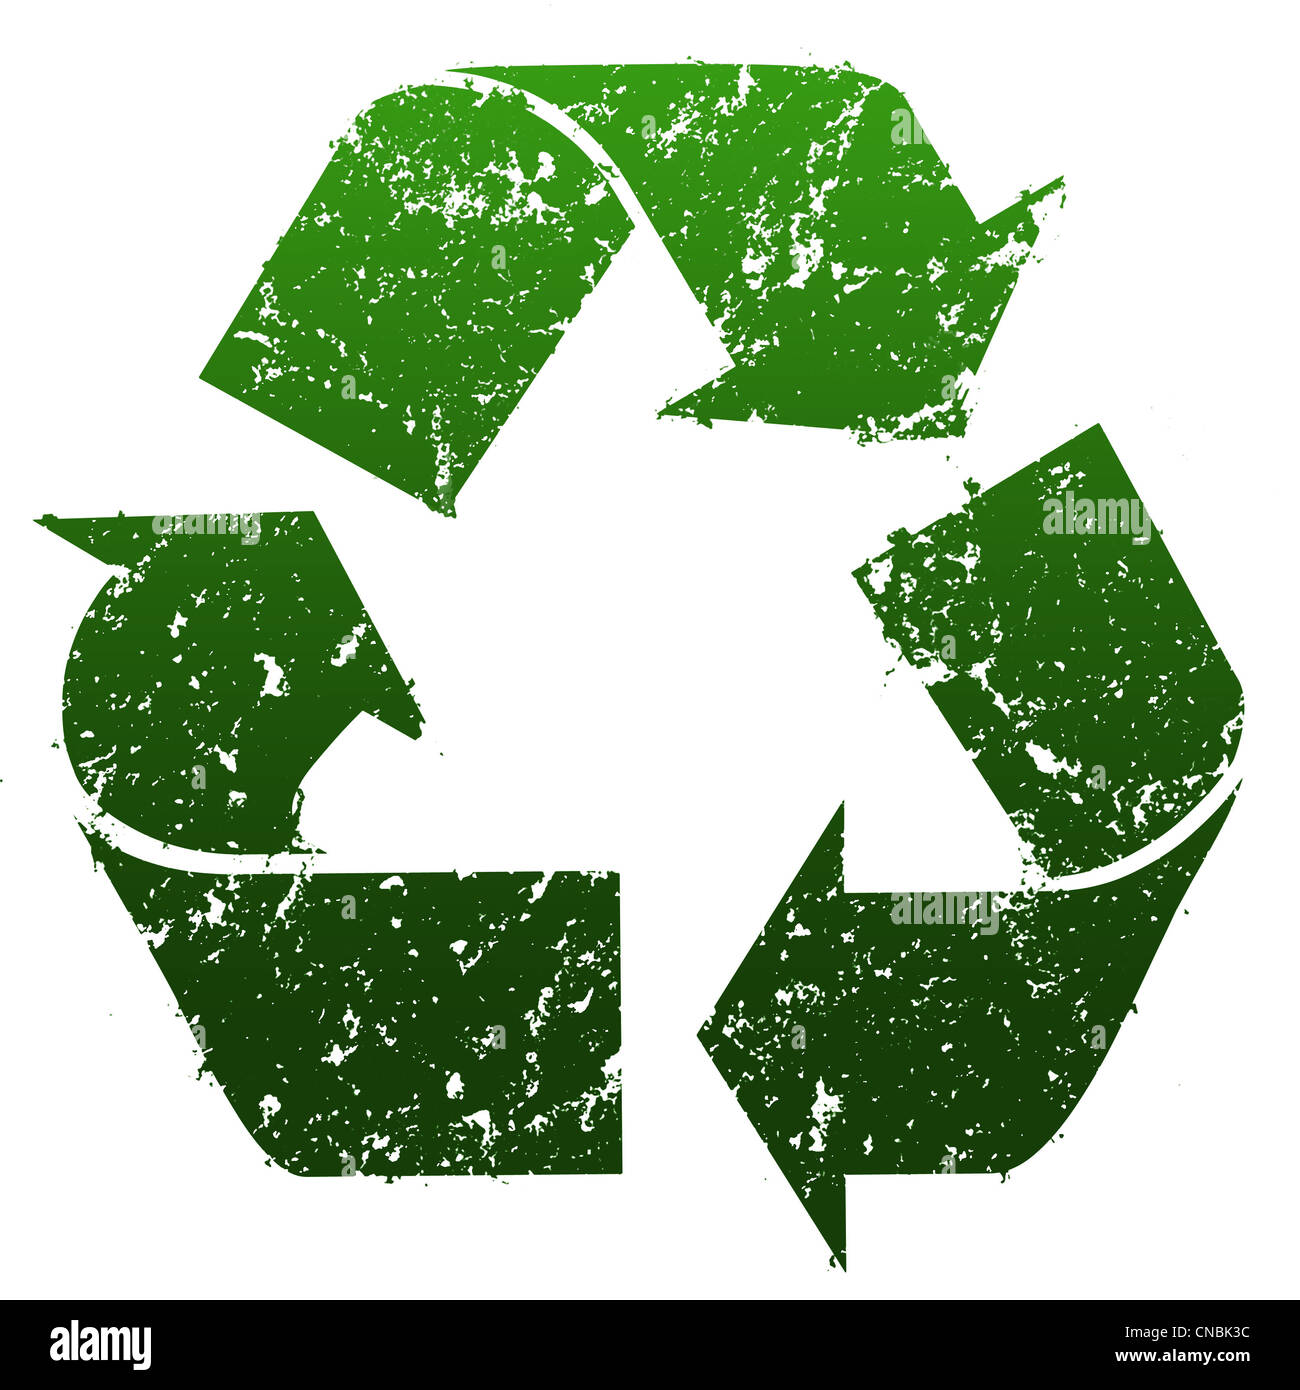 Green three-arrow recycle symbol with grunge effect Stock Photo